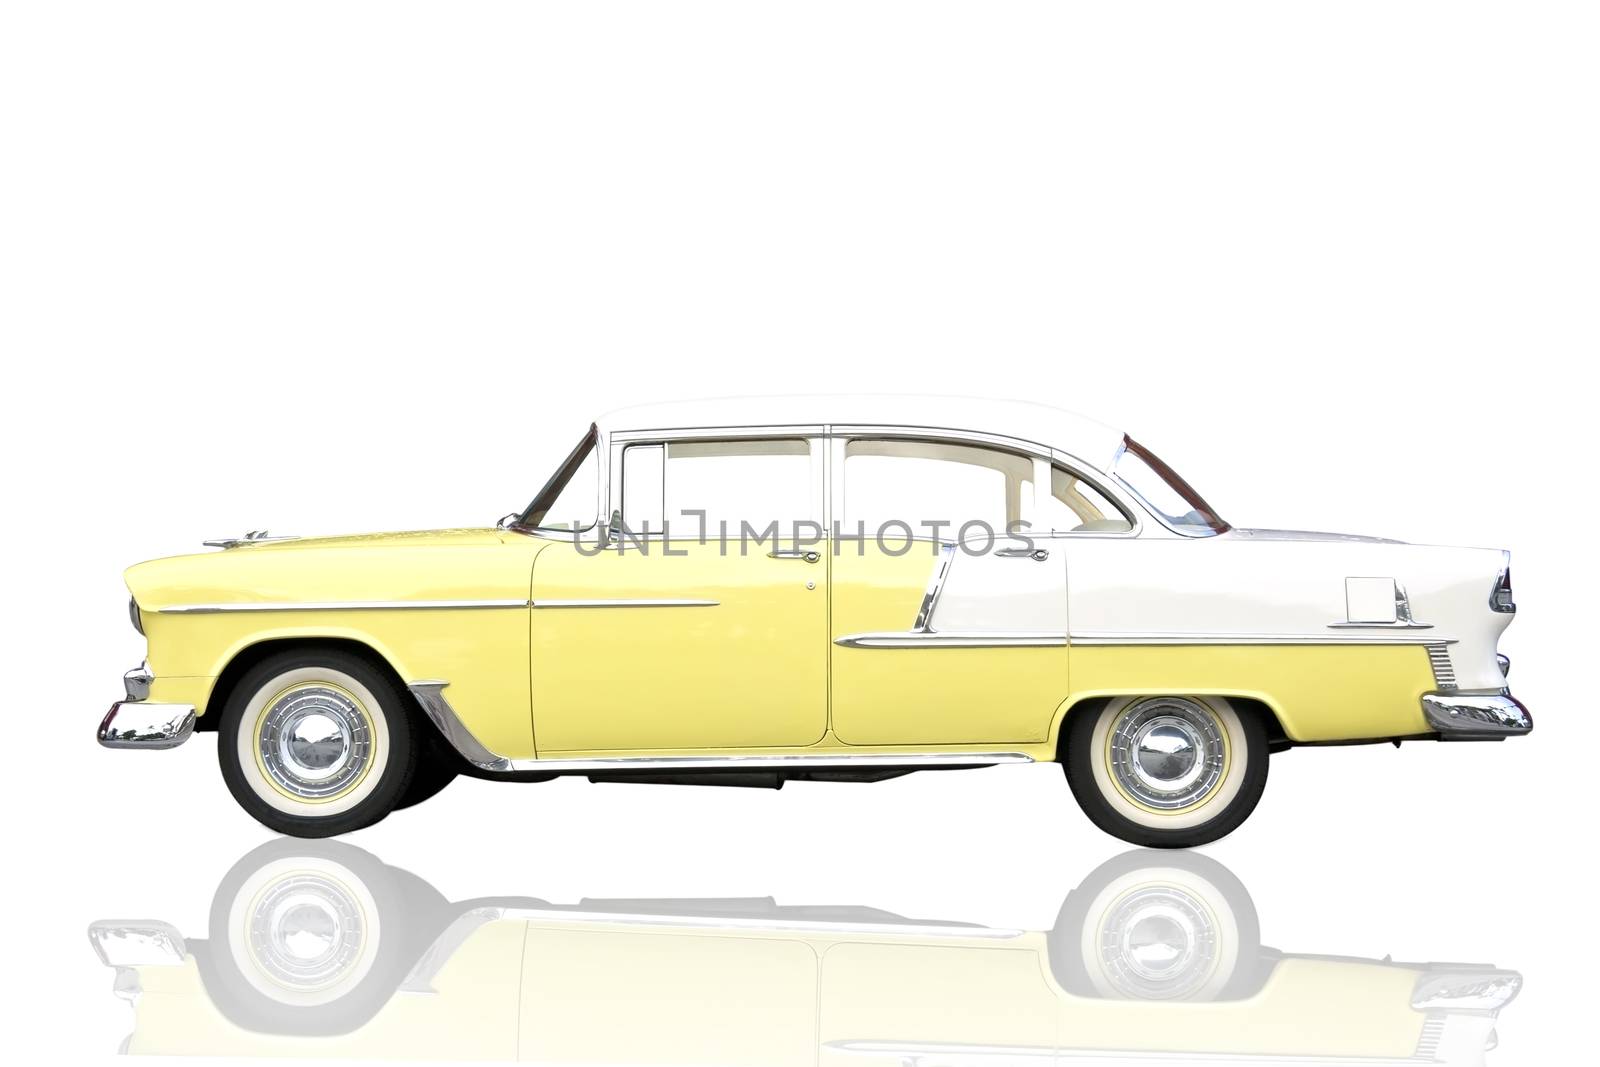 Old antique shiny yellow metallic car isolate on white with clipping mask.